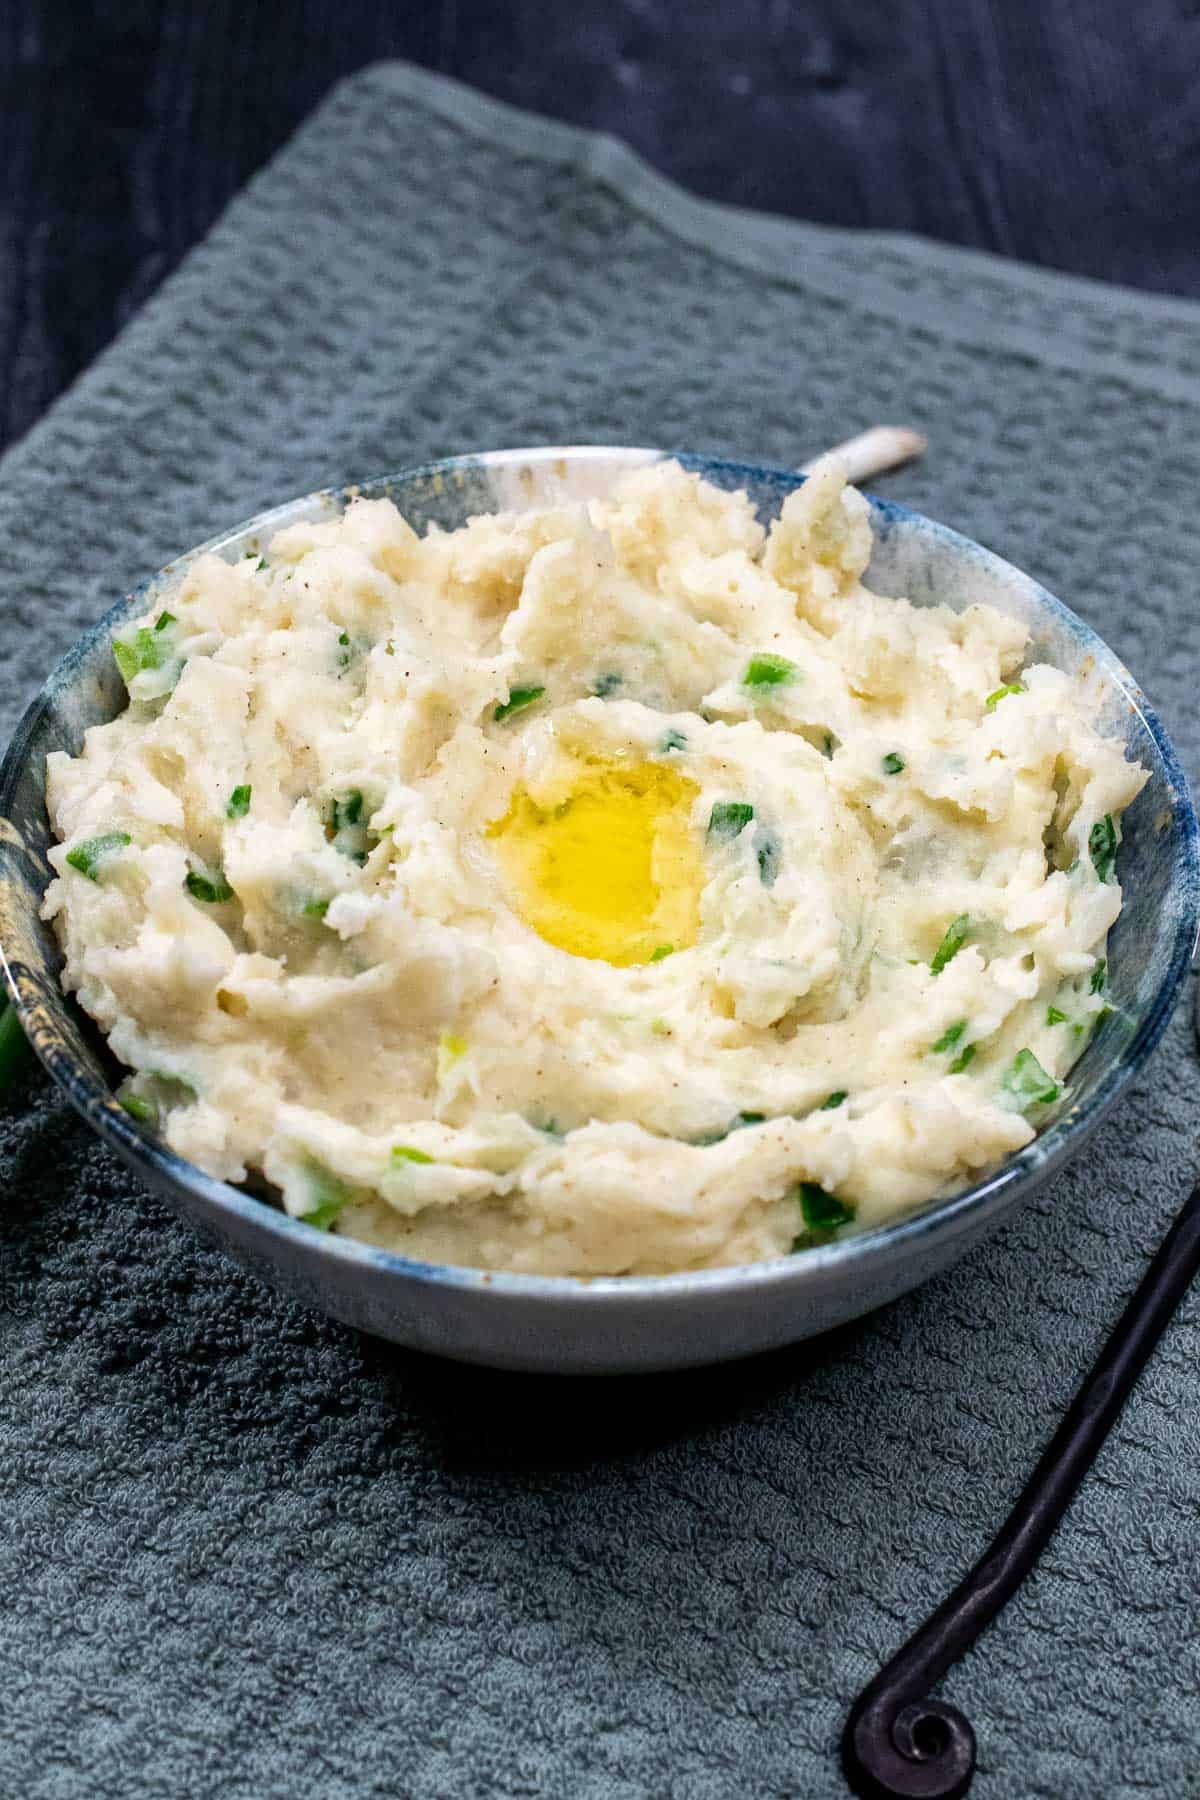 A bowl of Irish champ, creamy mashed potatoes with green onions, with melted butter pooling in the middle.